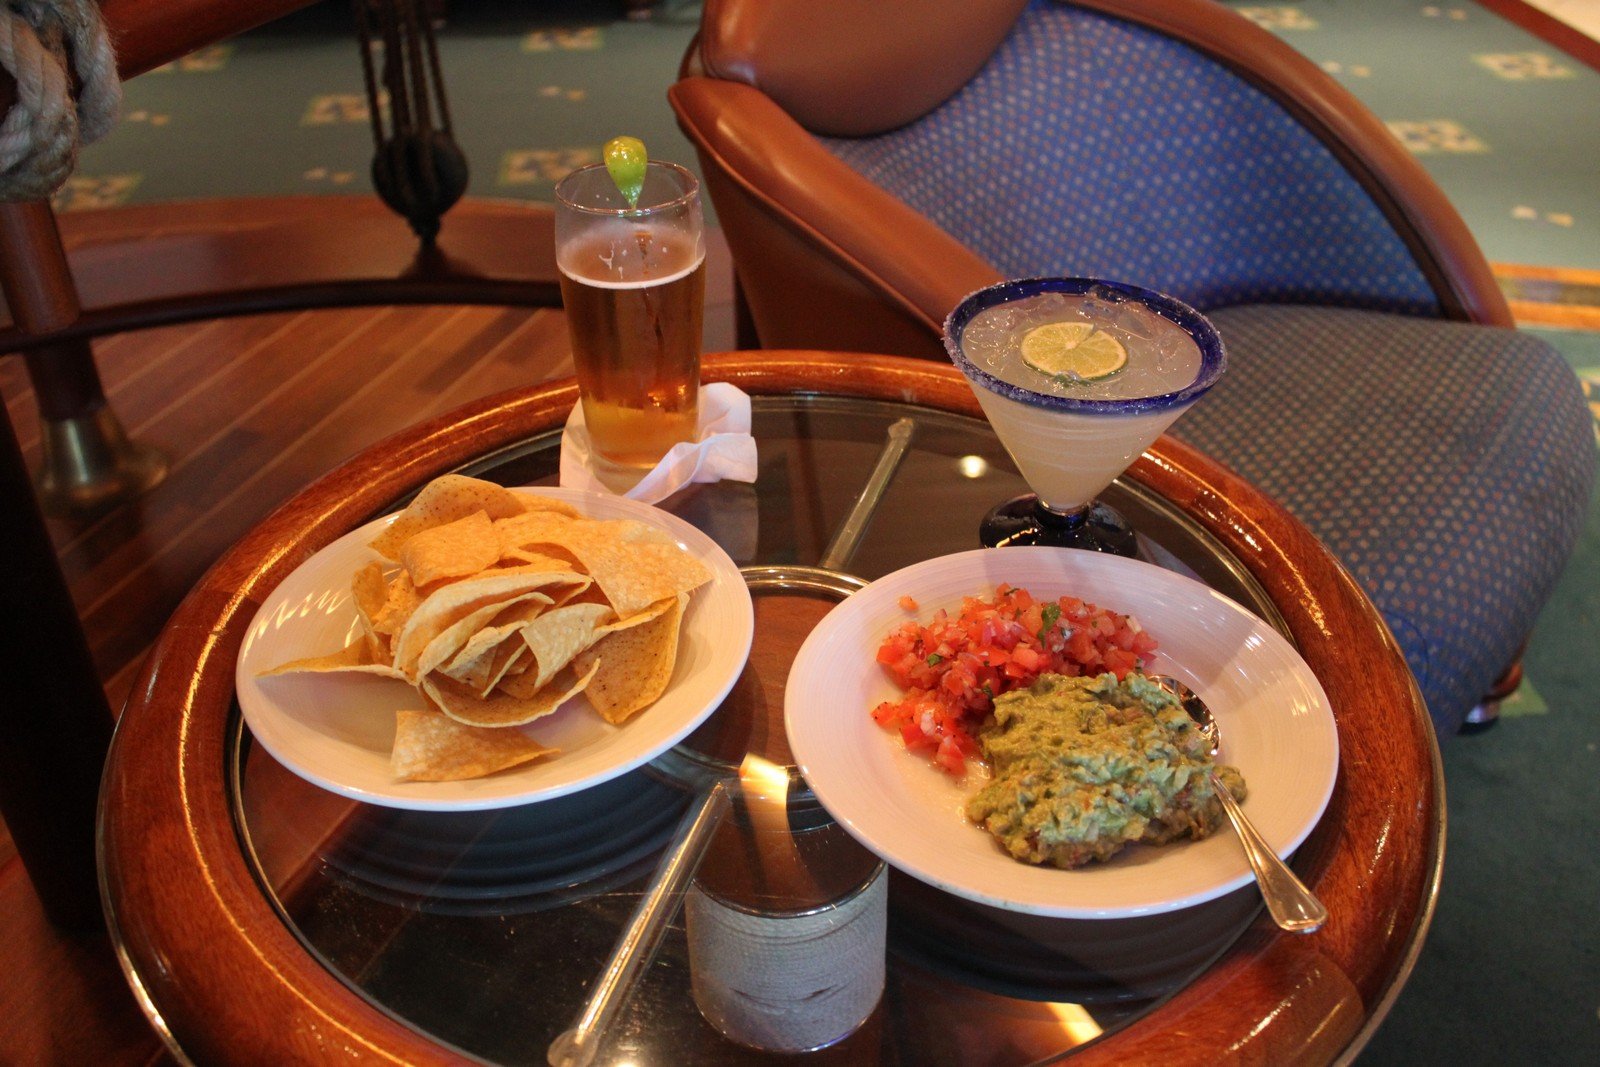 Freedom of the Seas secret: Ordering Sabor guacamole from the bar